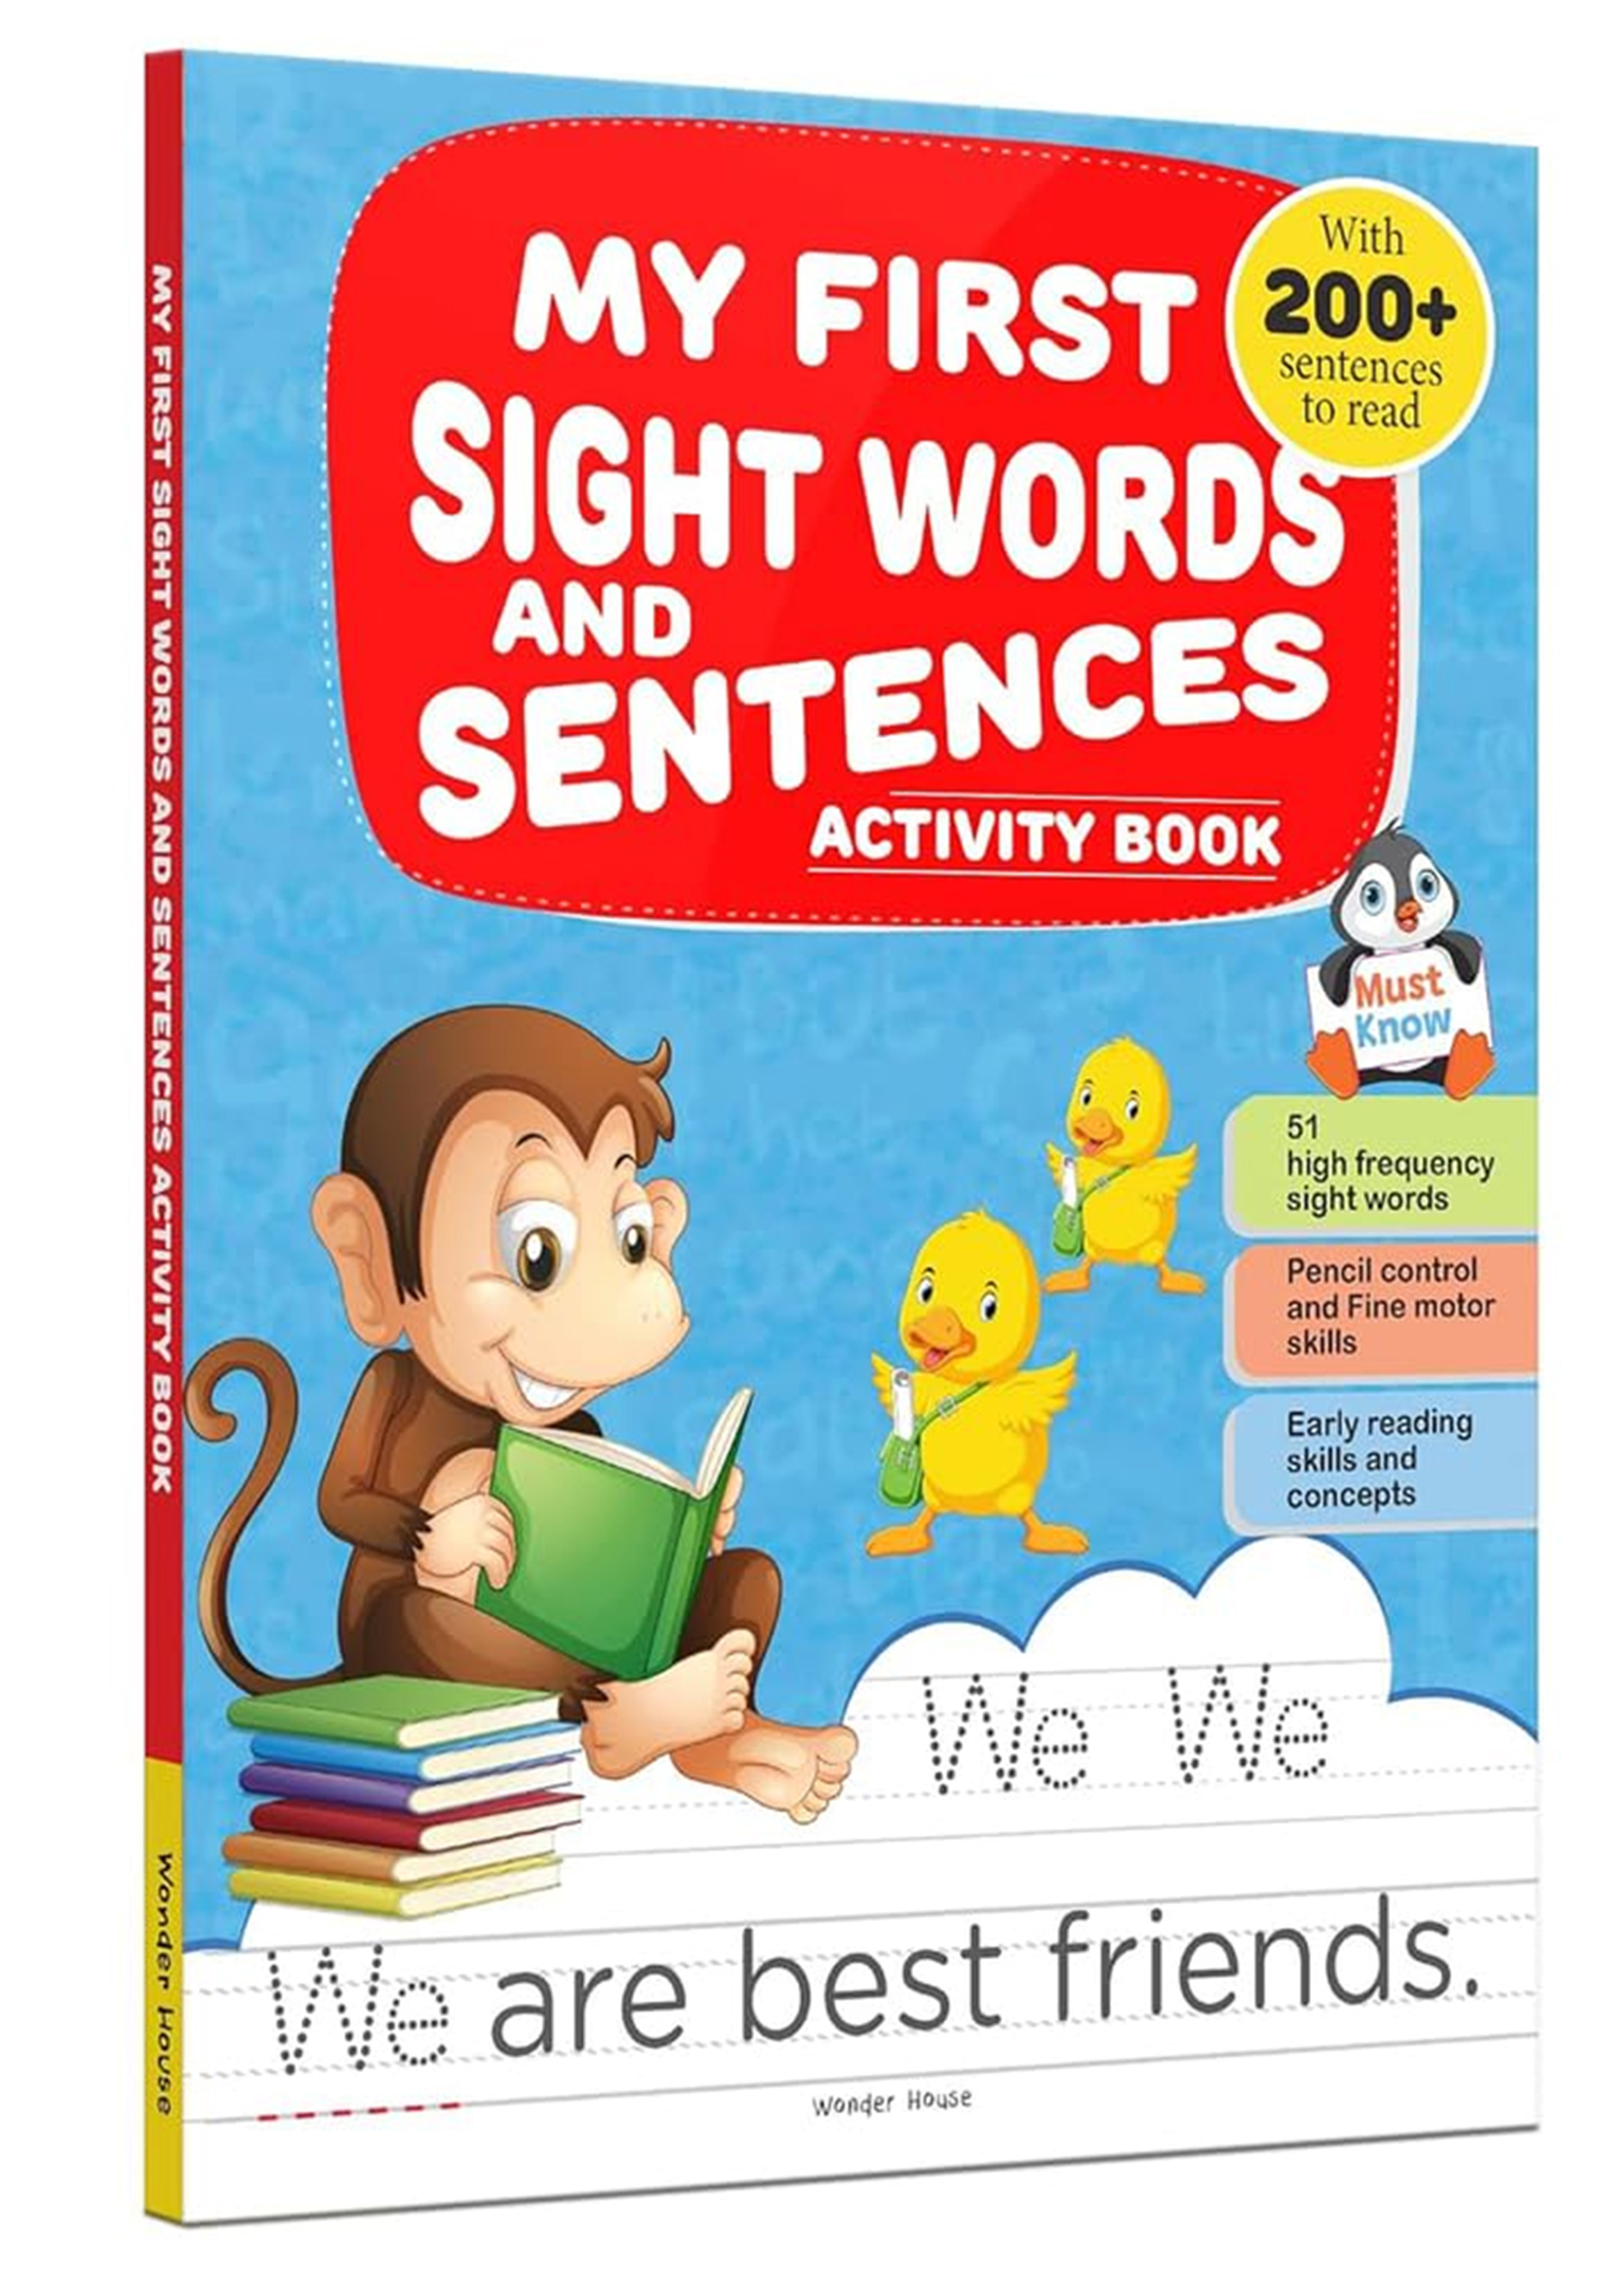 My First Sight Words And Sentences: Activity Book For Children (পেপারব্যাক)